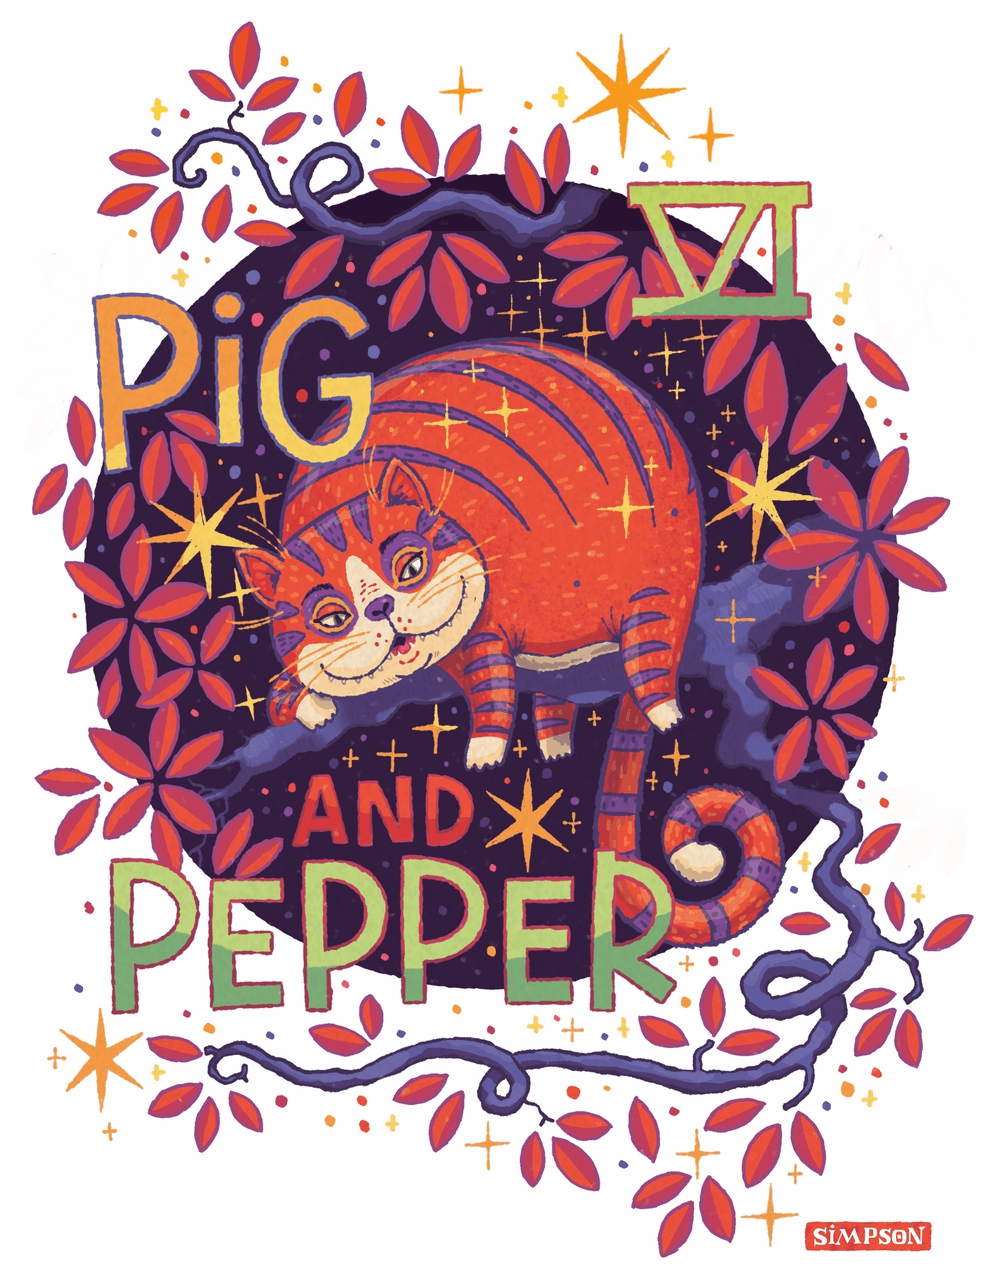 PIG and PEPPER - Cheshire Cat